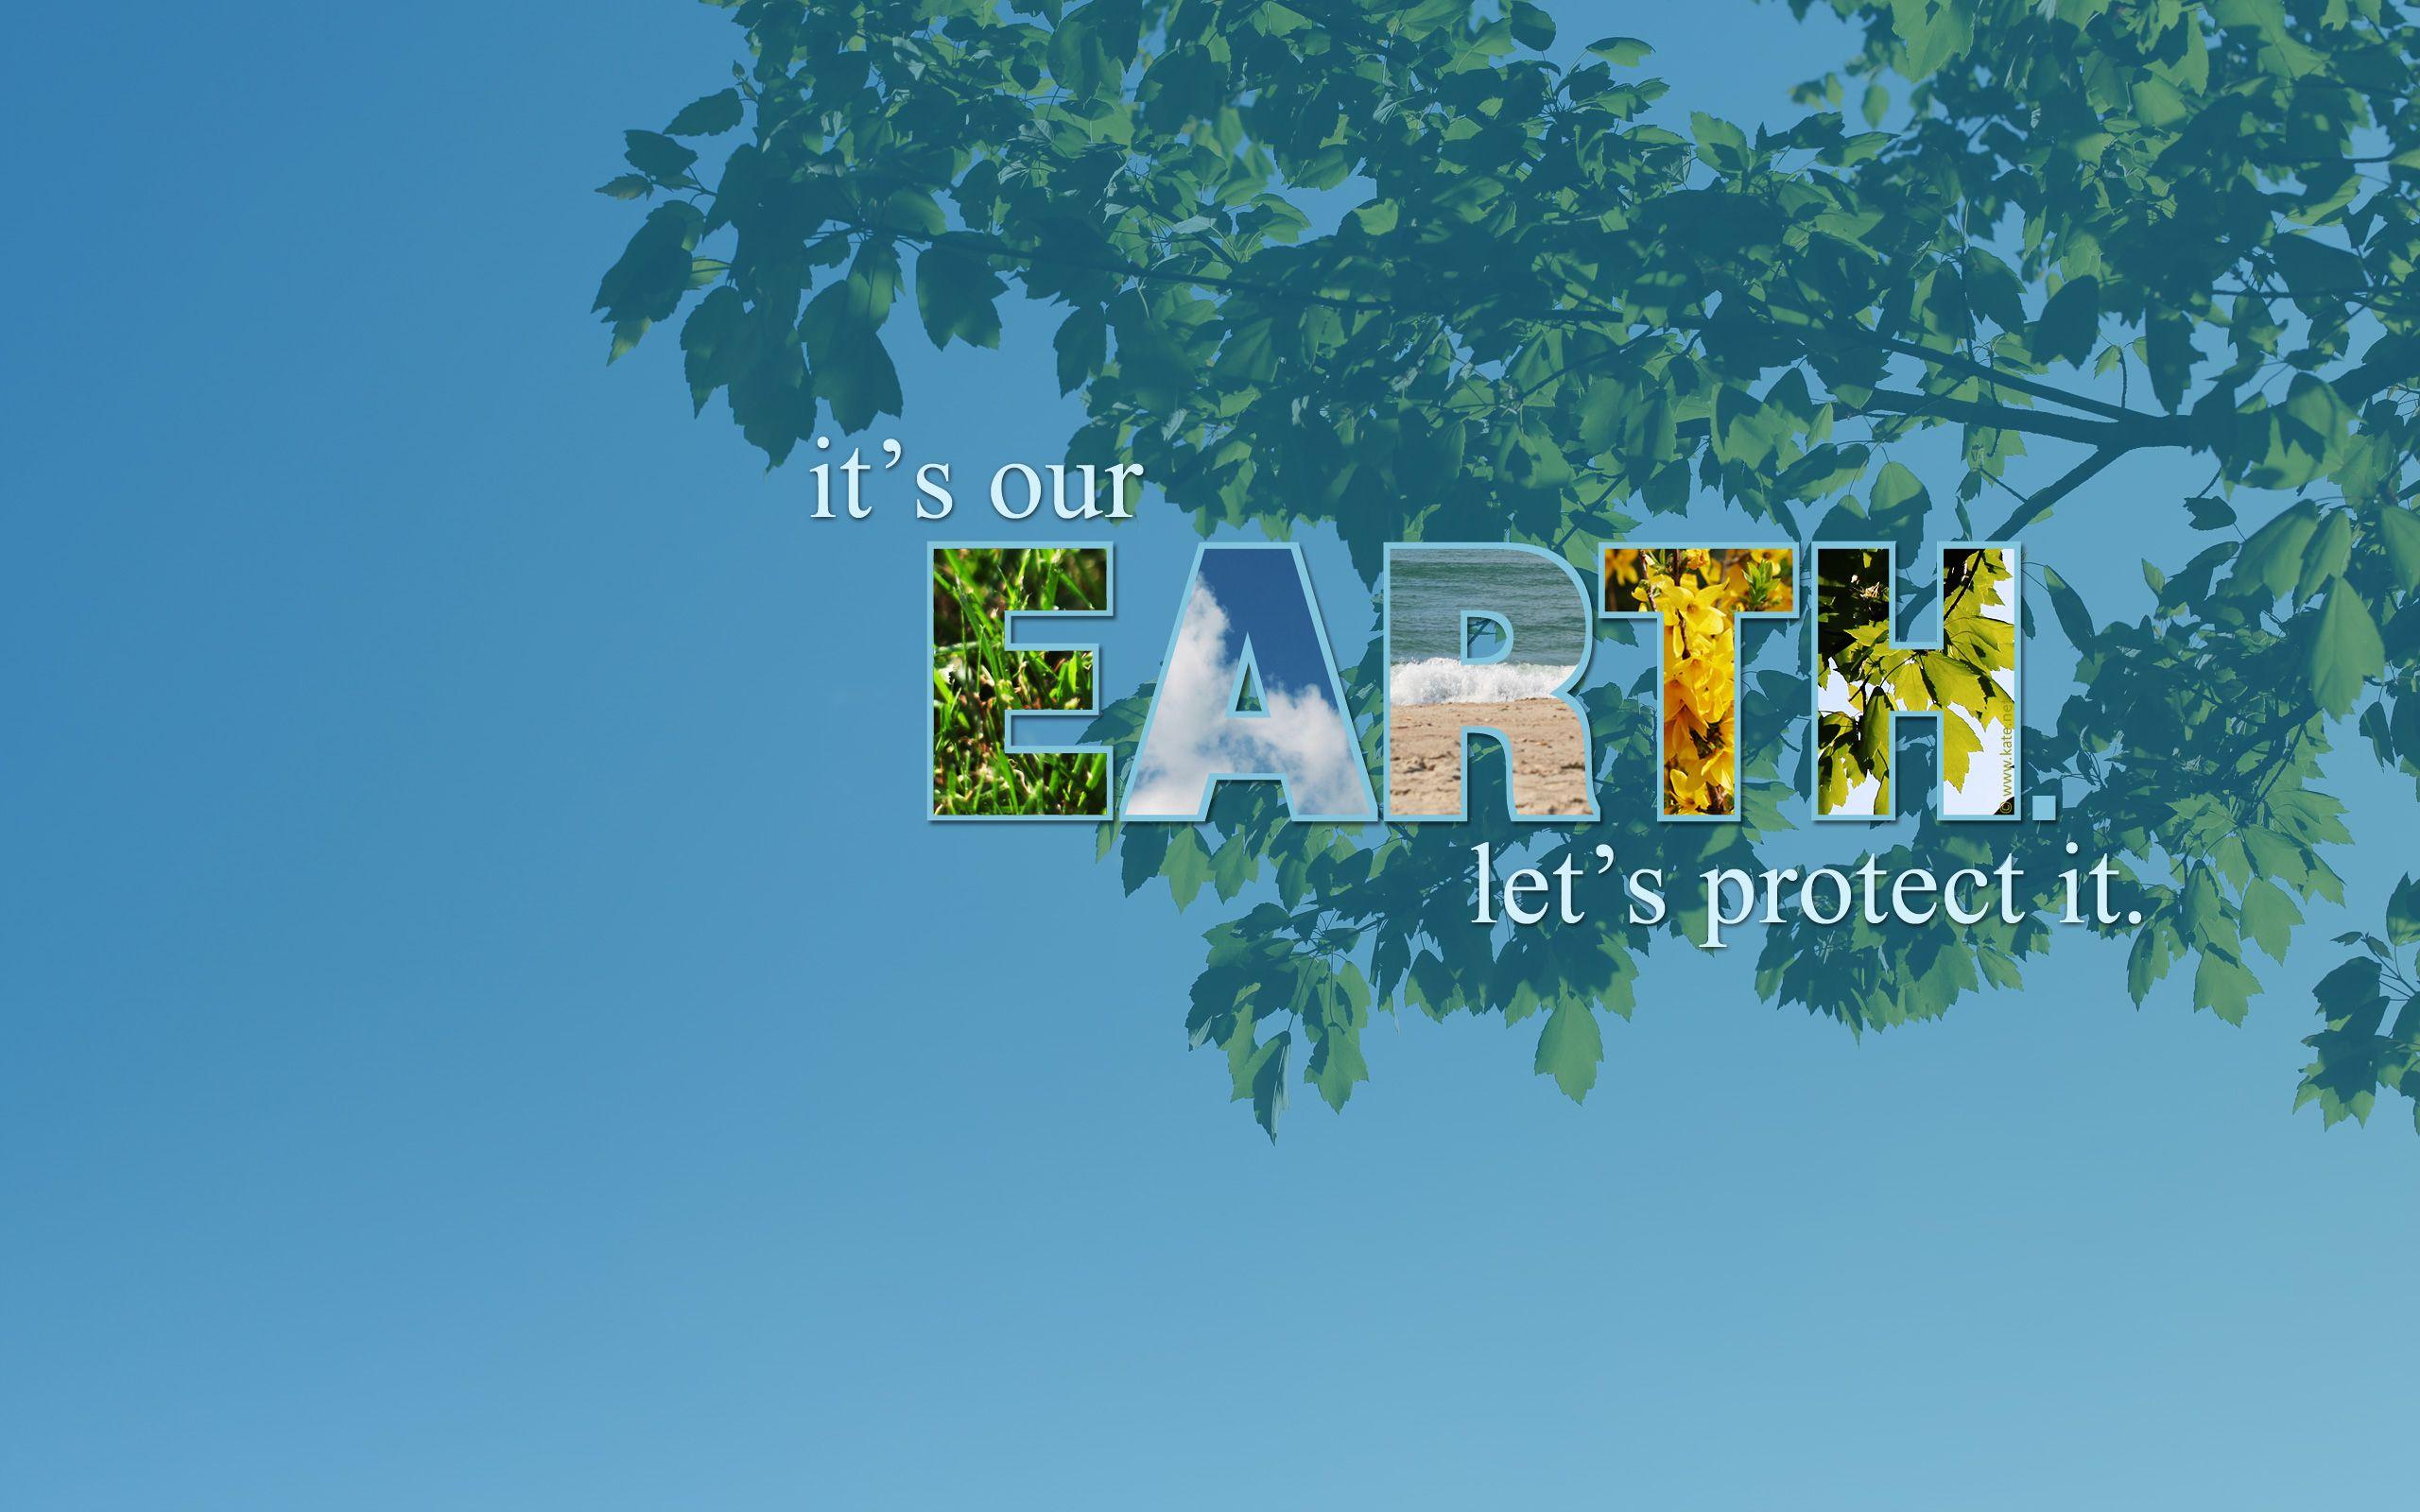 Earth Day Wallpaper, Picture, Image